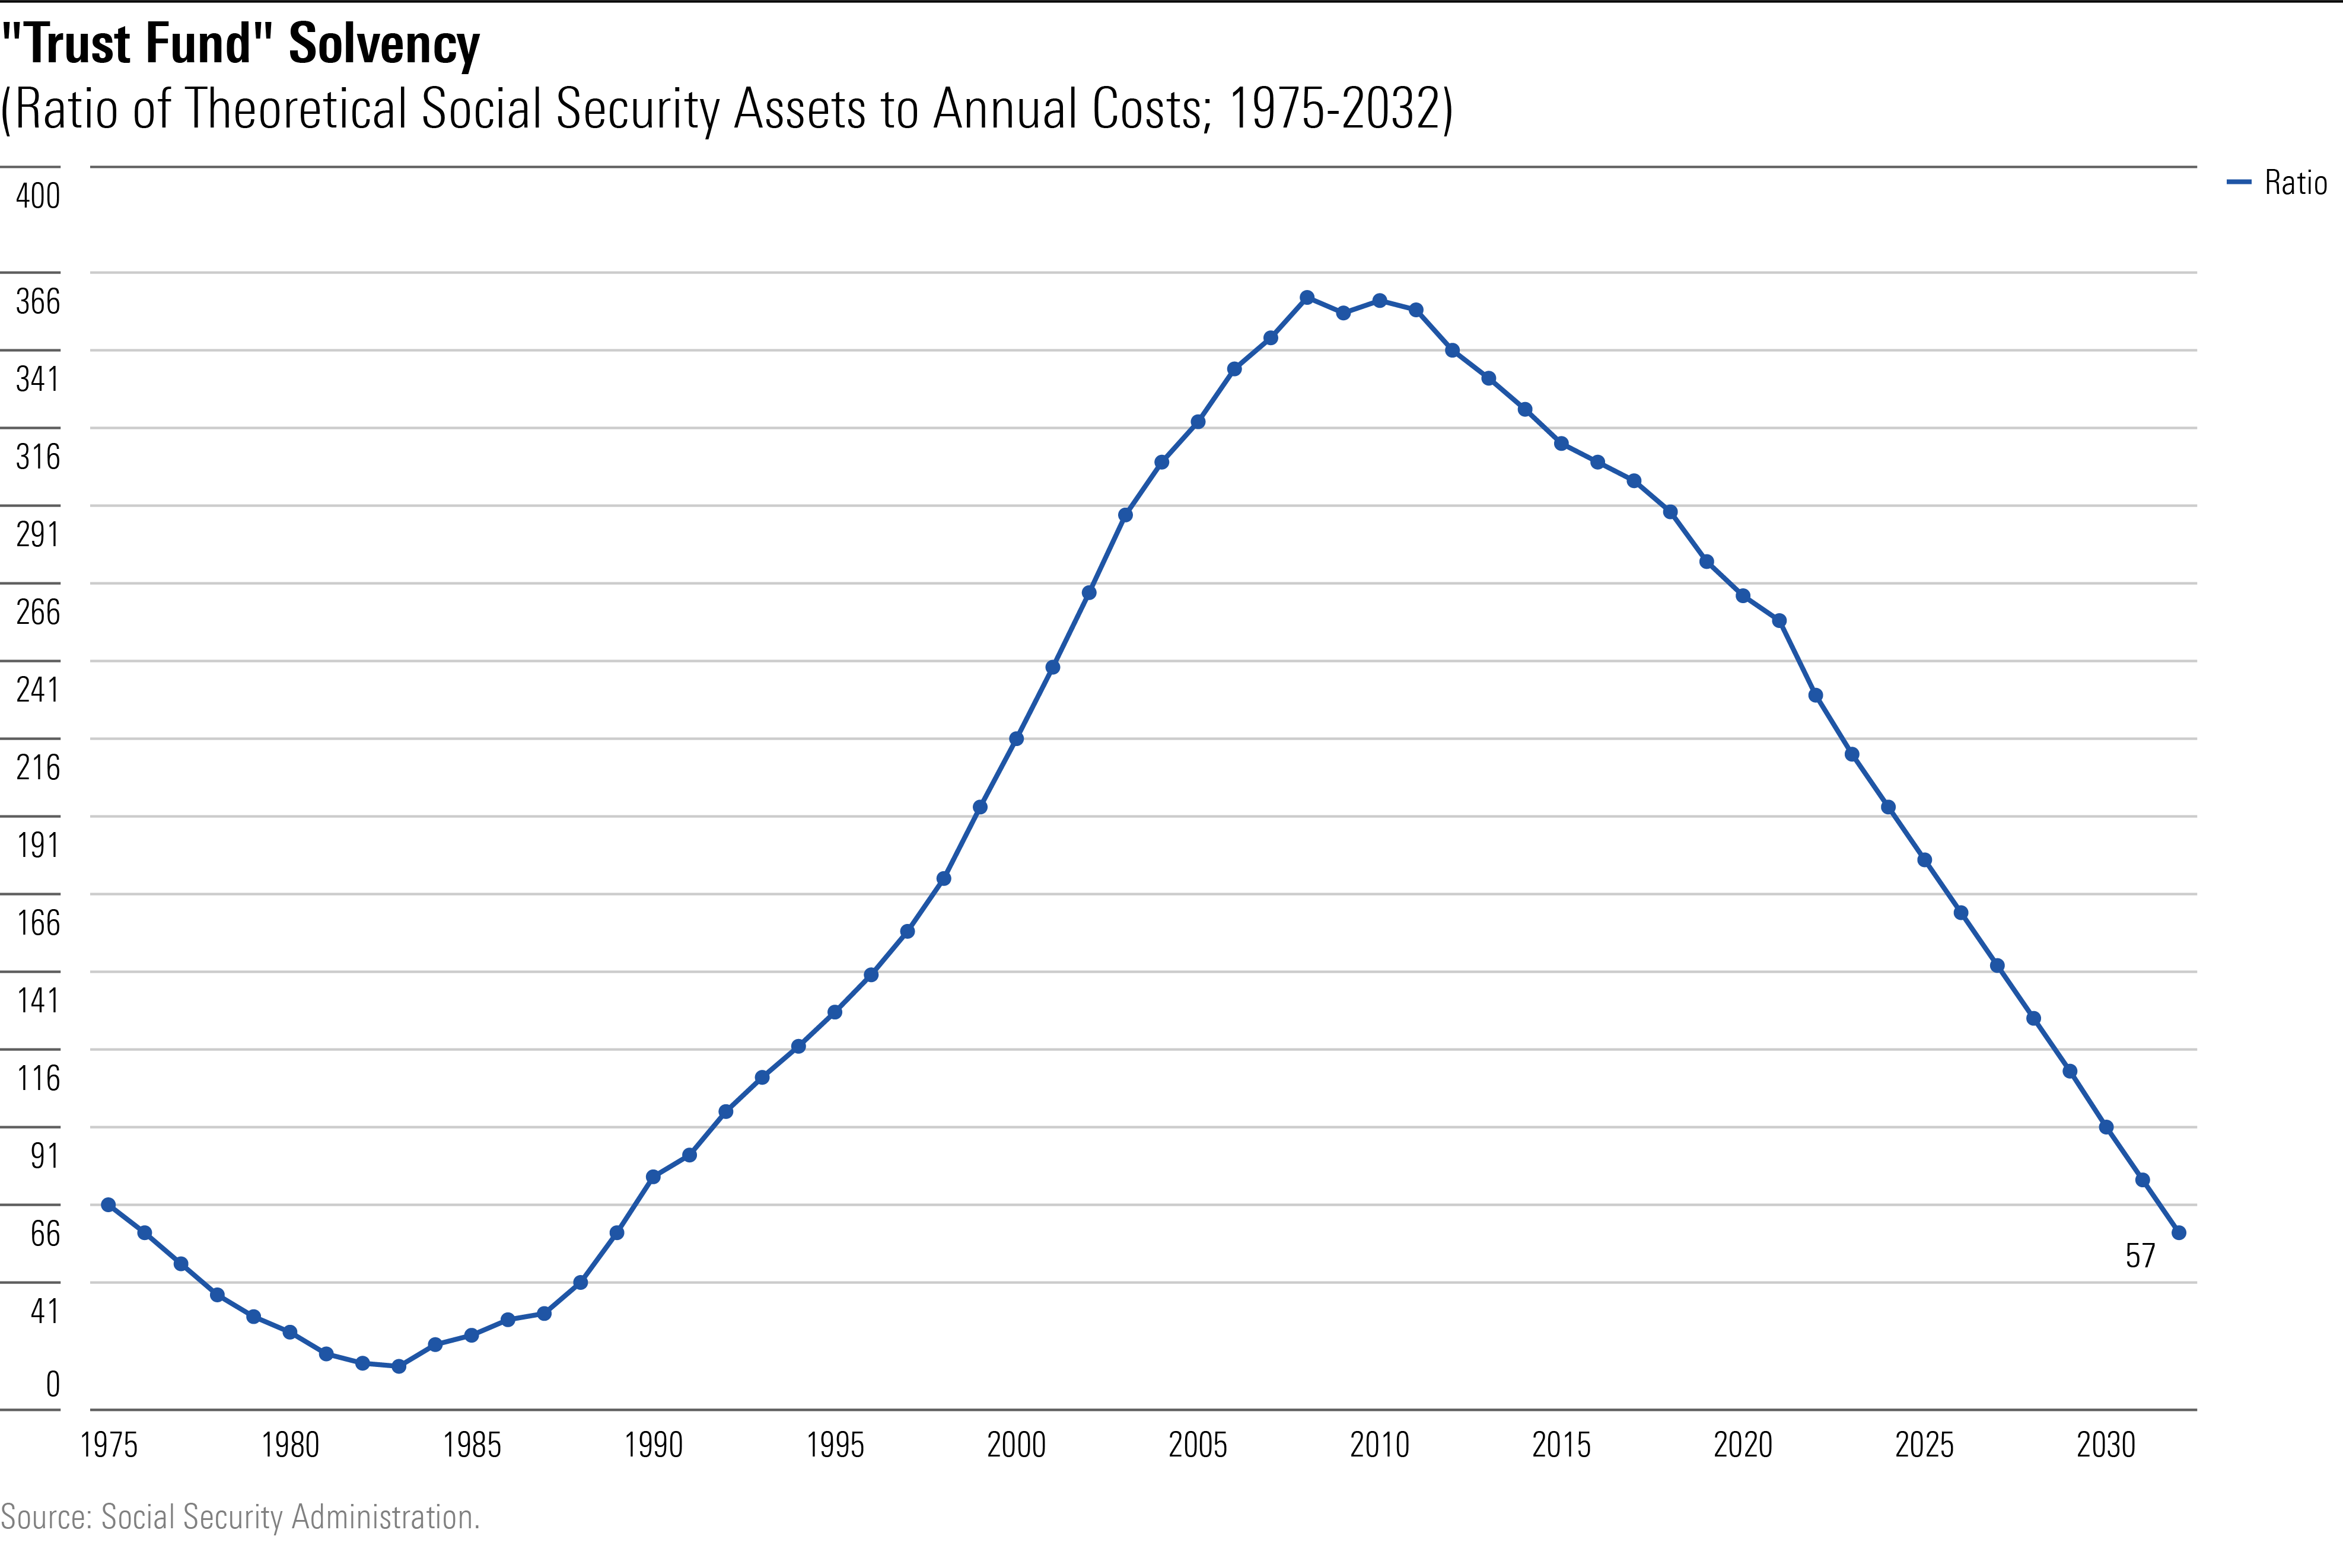 A line chart showing the annual ratio of 1) the size of the Social Security Trust Fund when compared to 2) the annual cost incurred by that fund, from 1975 through the projection until 2032.